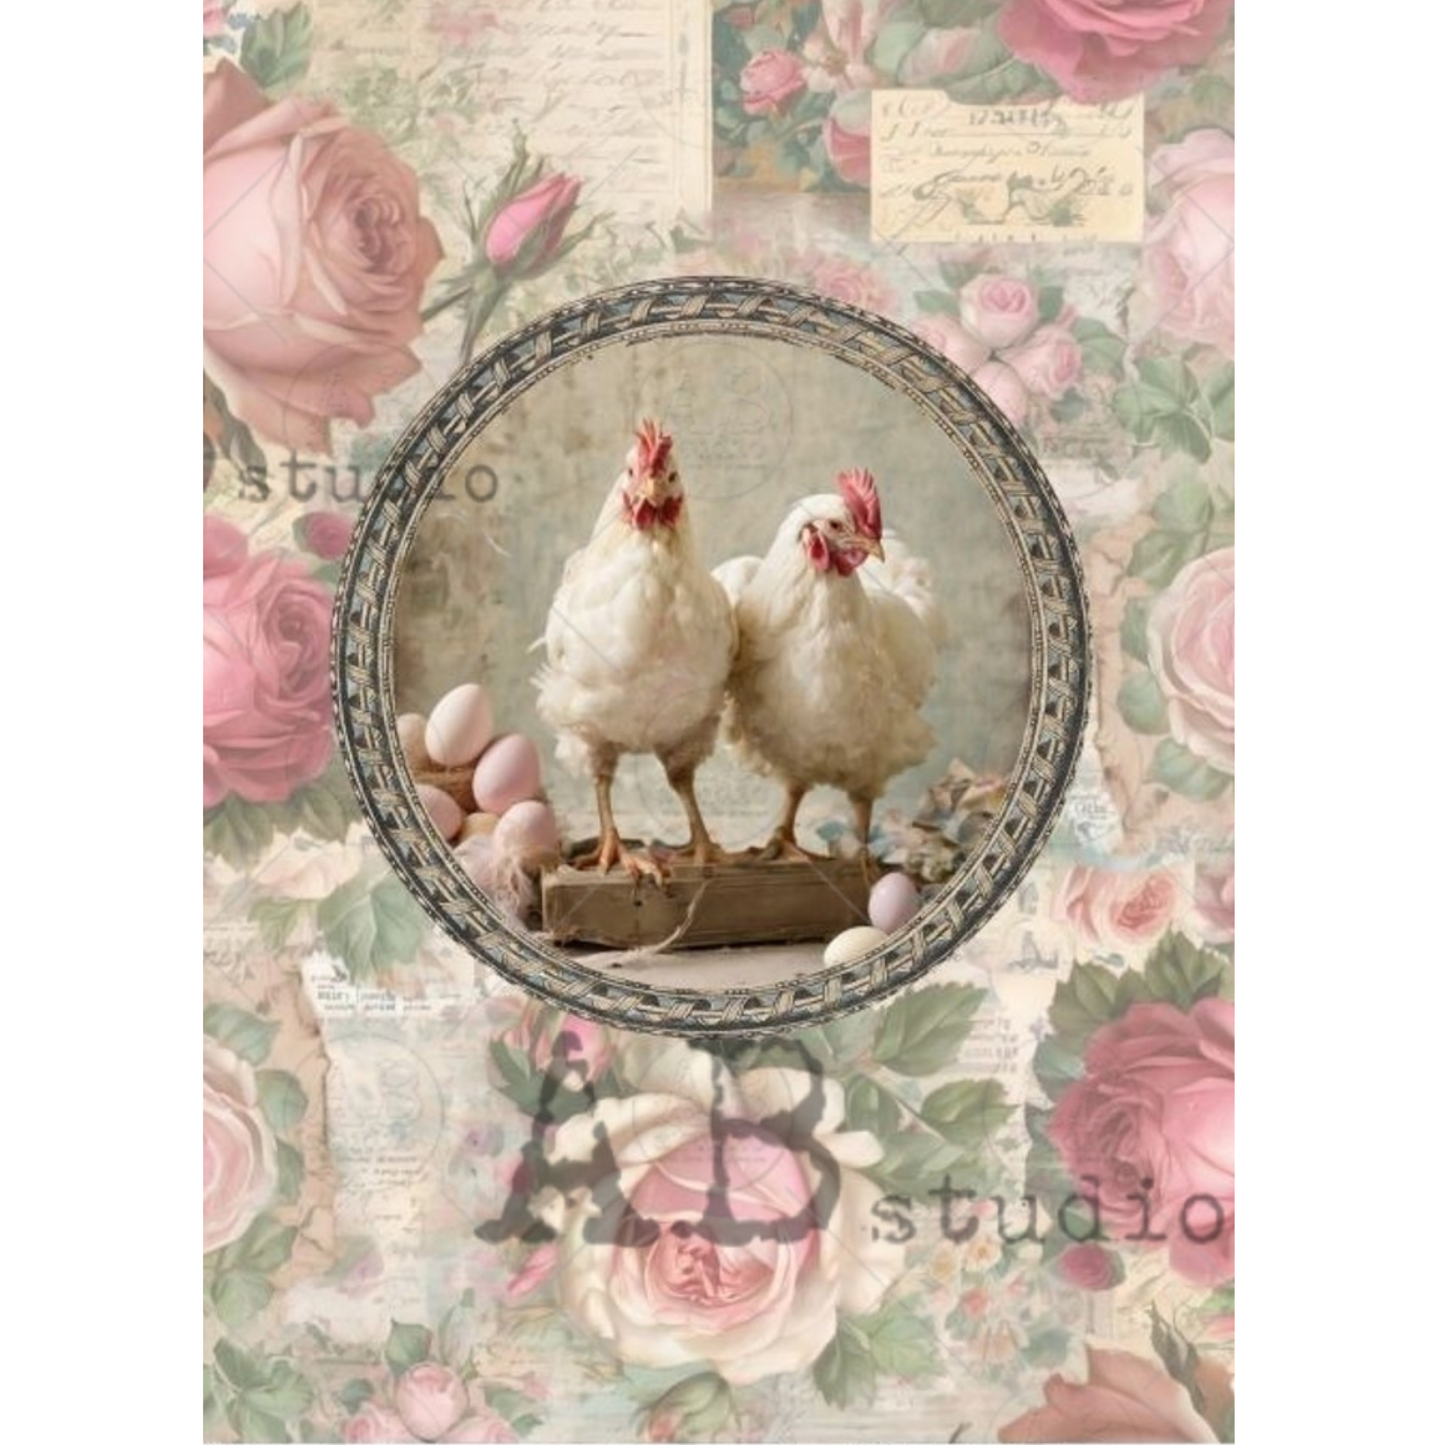 "Shabby Chic Easter Hens" decoupage rice paper by AB Studio. Available at Milton's Daughter.